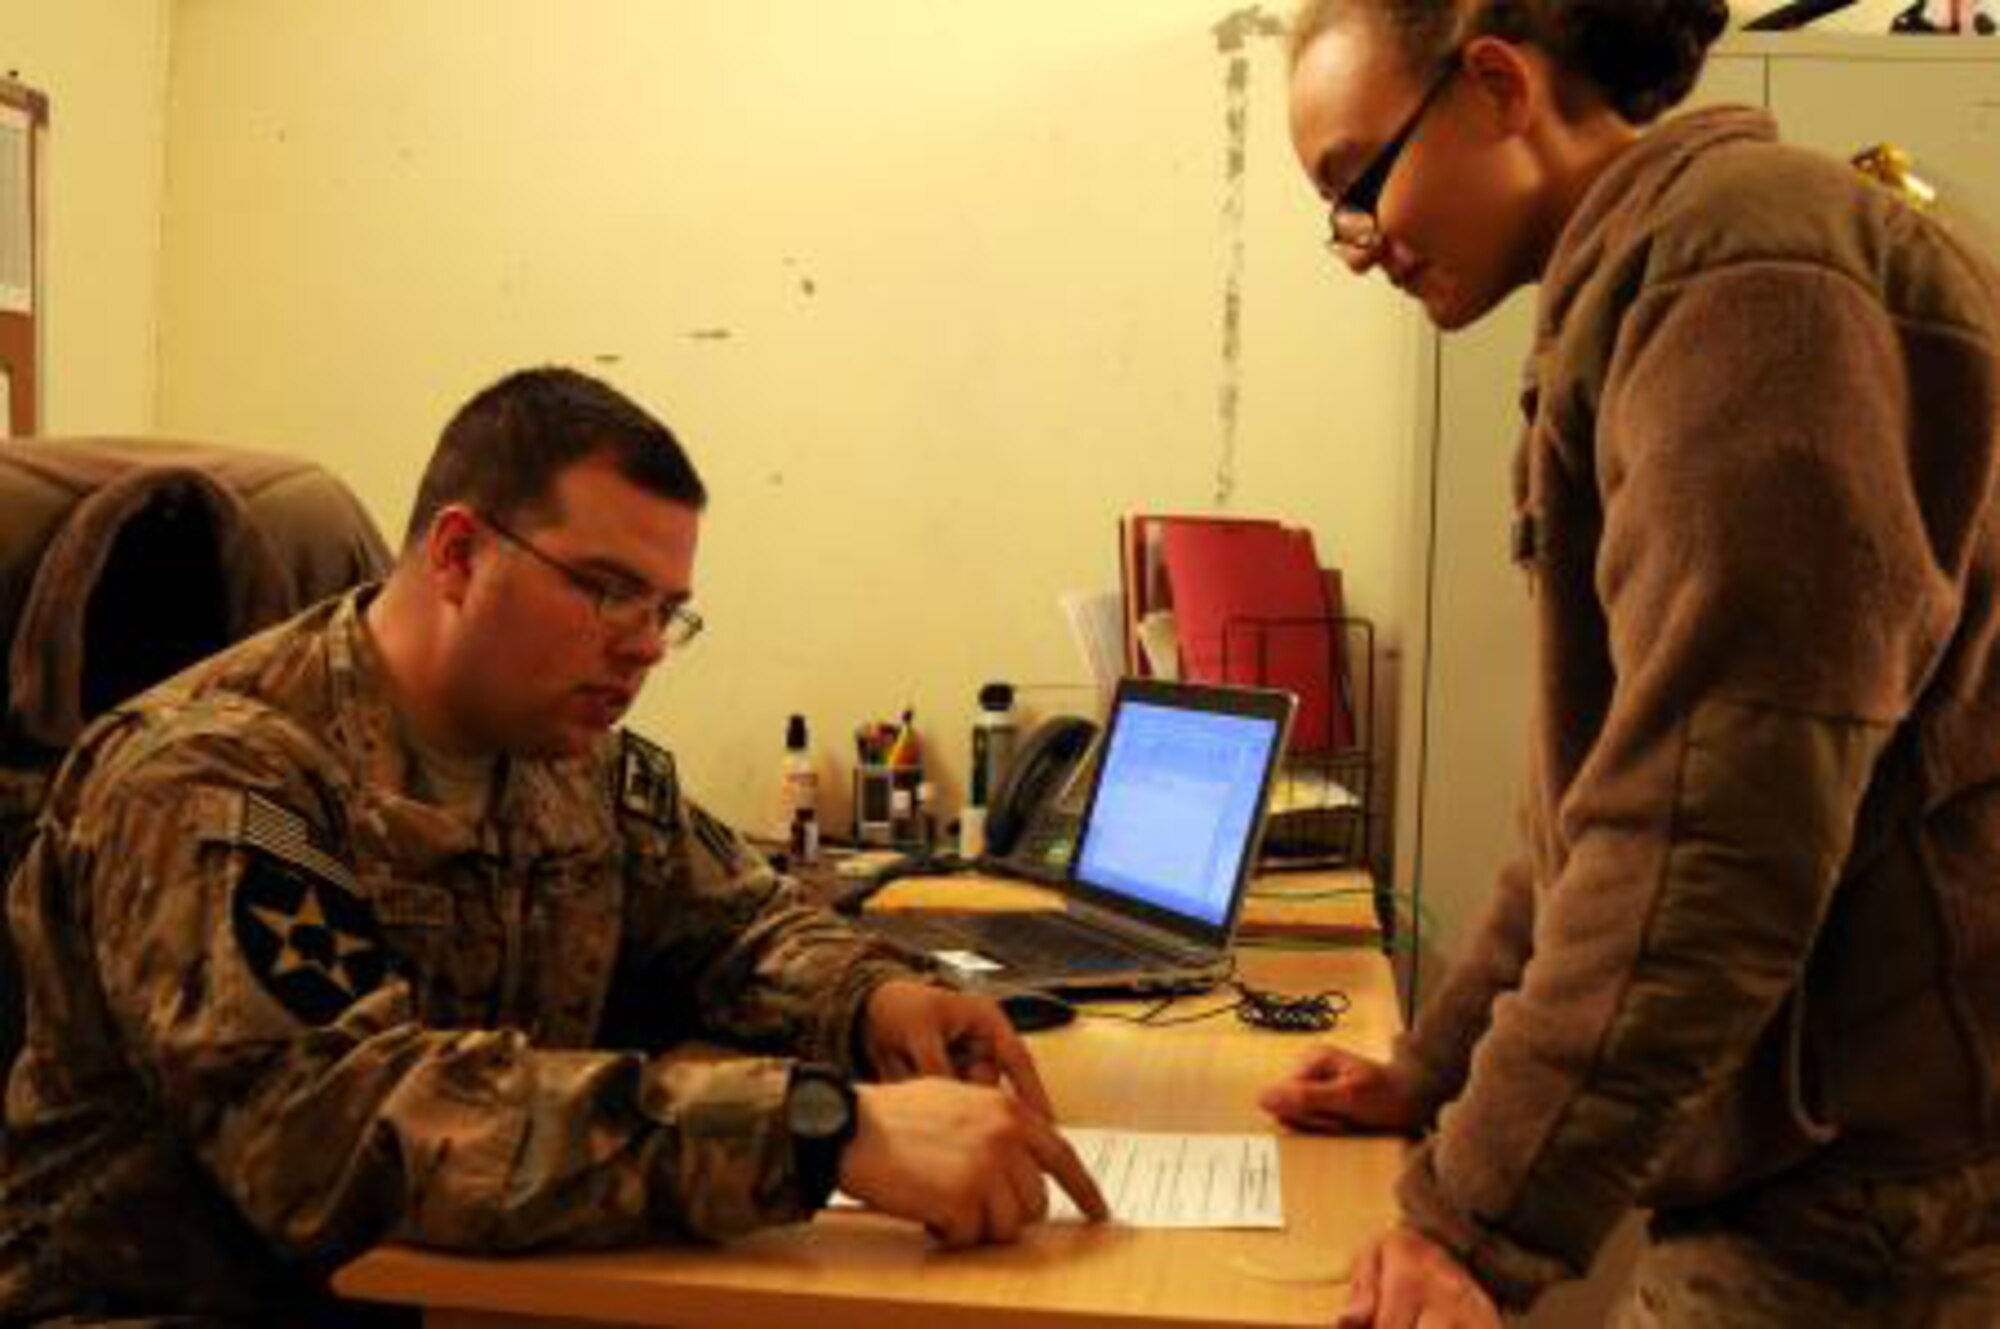 Tech. Sgt. Christopher McDaniel explains an important section of the inprocessing sheet to a visiting member at Forward Operating Base Smart, Afghanistan, Dec. 17,2012. McDaniel is a vehicle operator who was thrust into the head personnel position due to mission needs. The Detroit, Mich. native occasionally has opportunities to return to his combat trucker roots when mission dictates. (U.S. Air Force Photo by Senior Airman Patrice Clarke)




